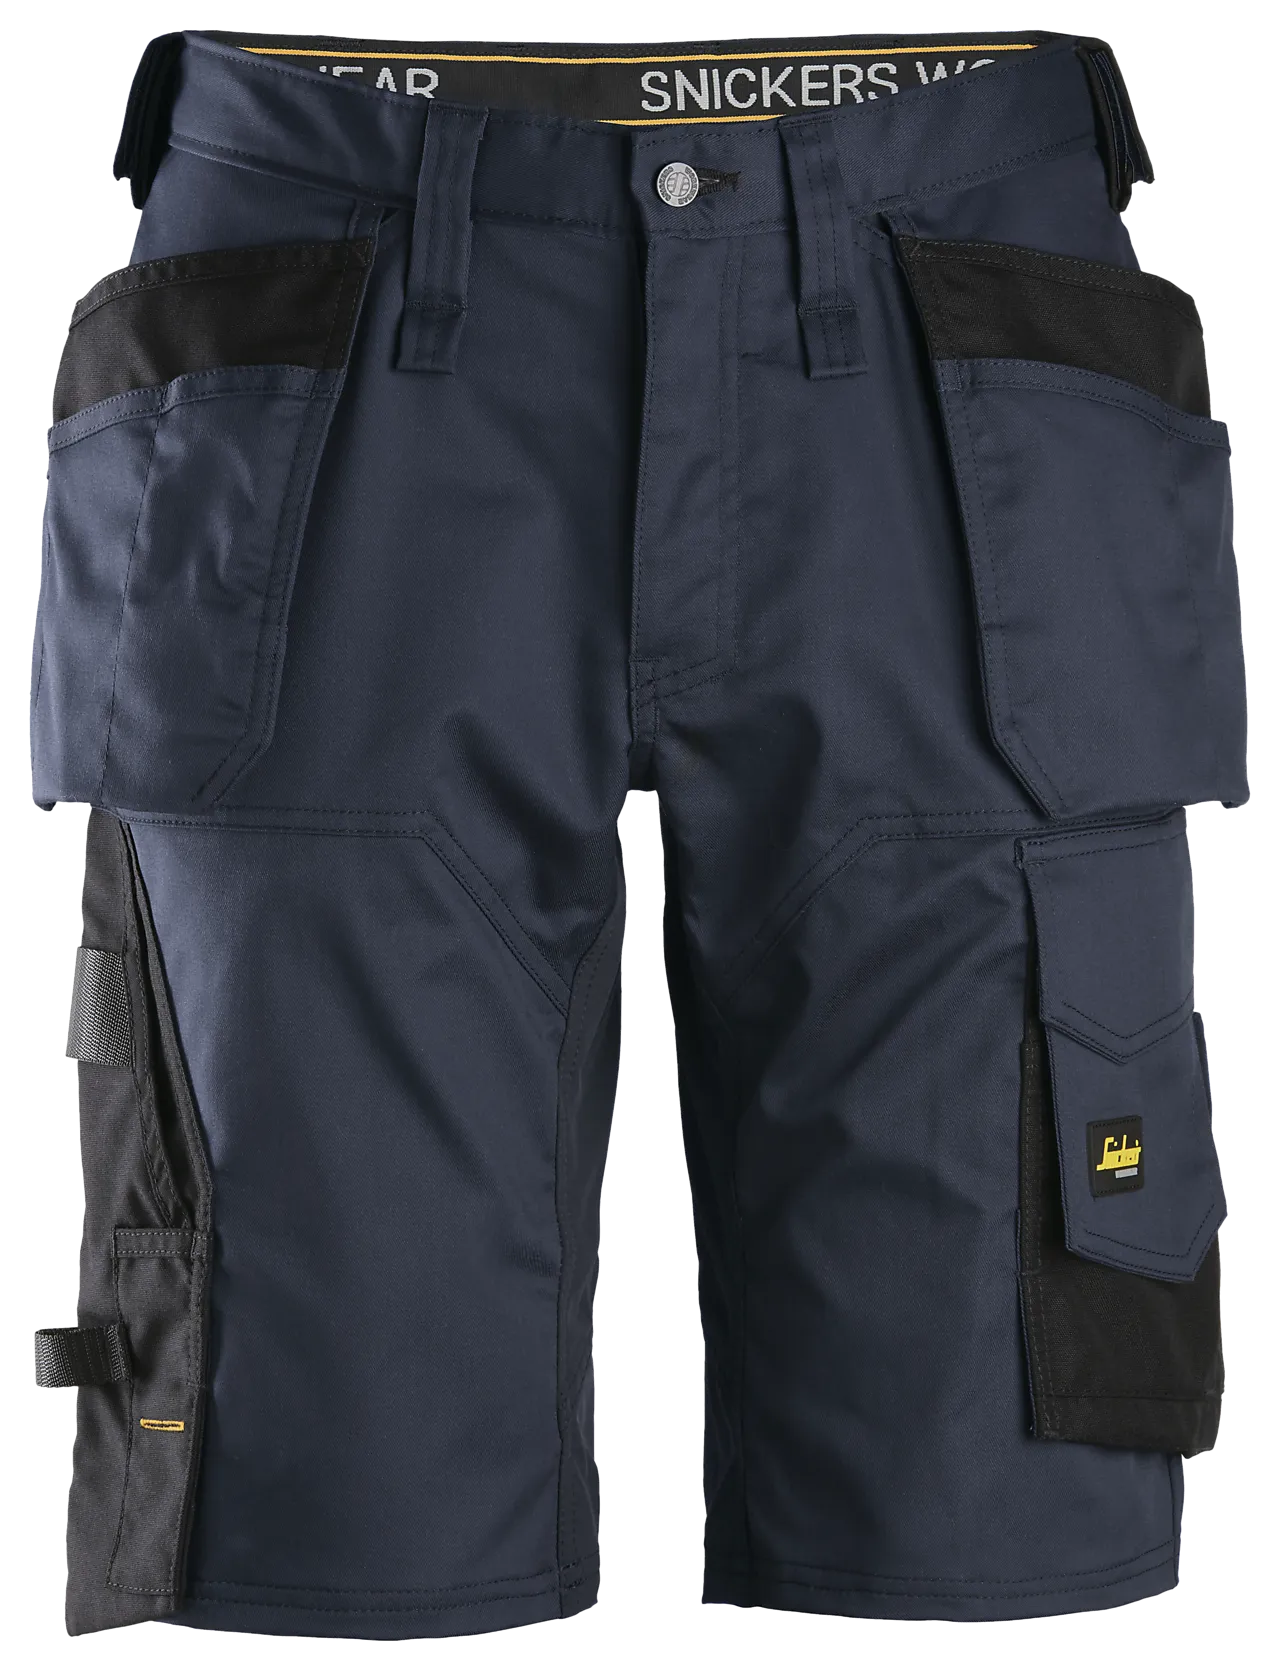 Shorts 6151 mblå 50 snickers workwear